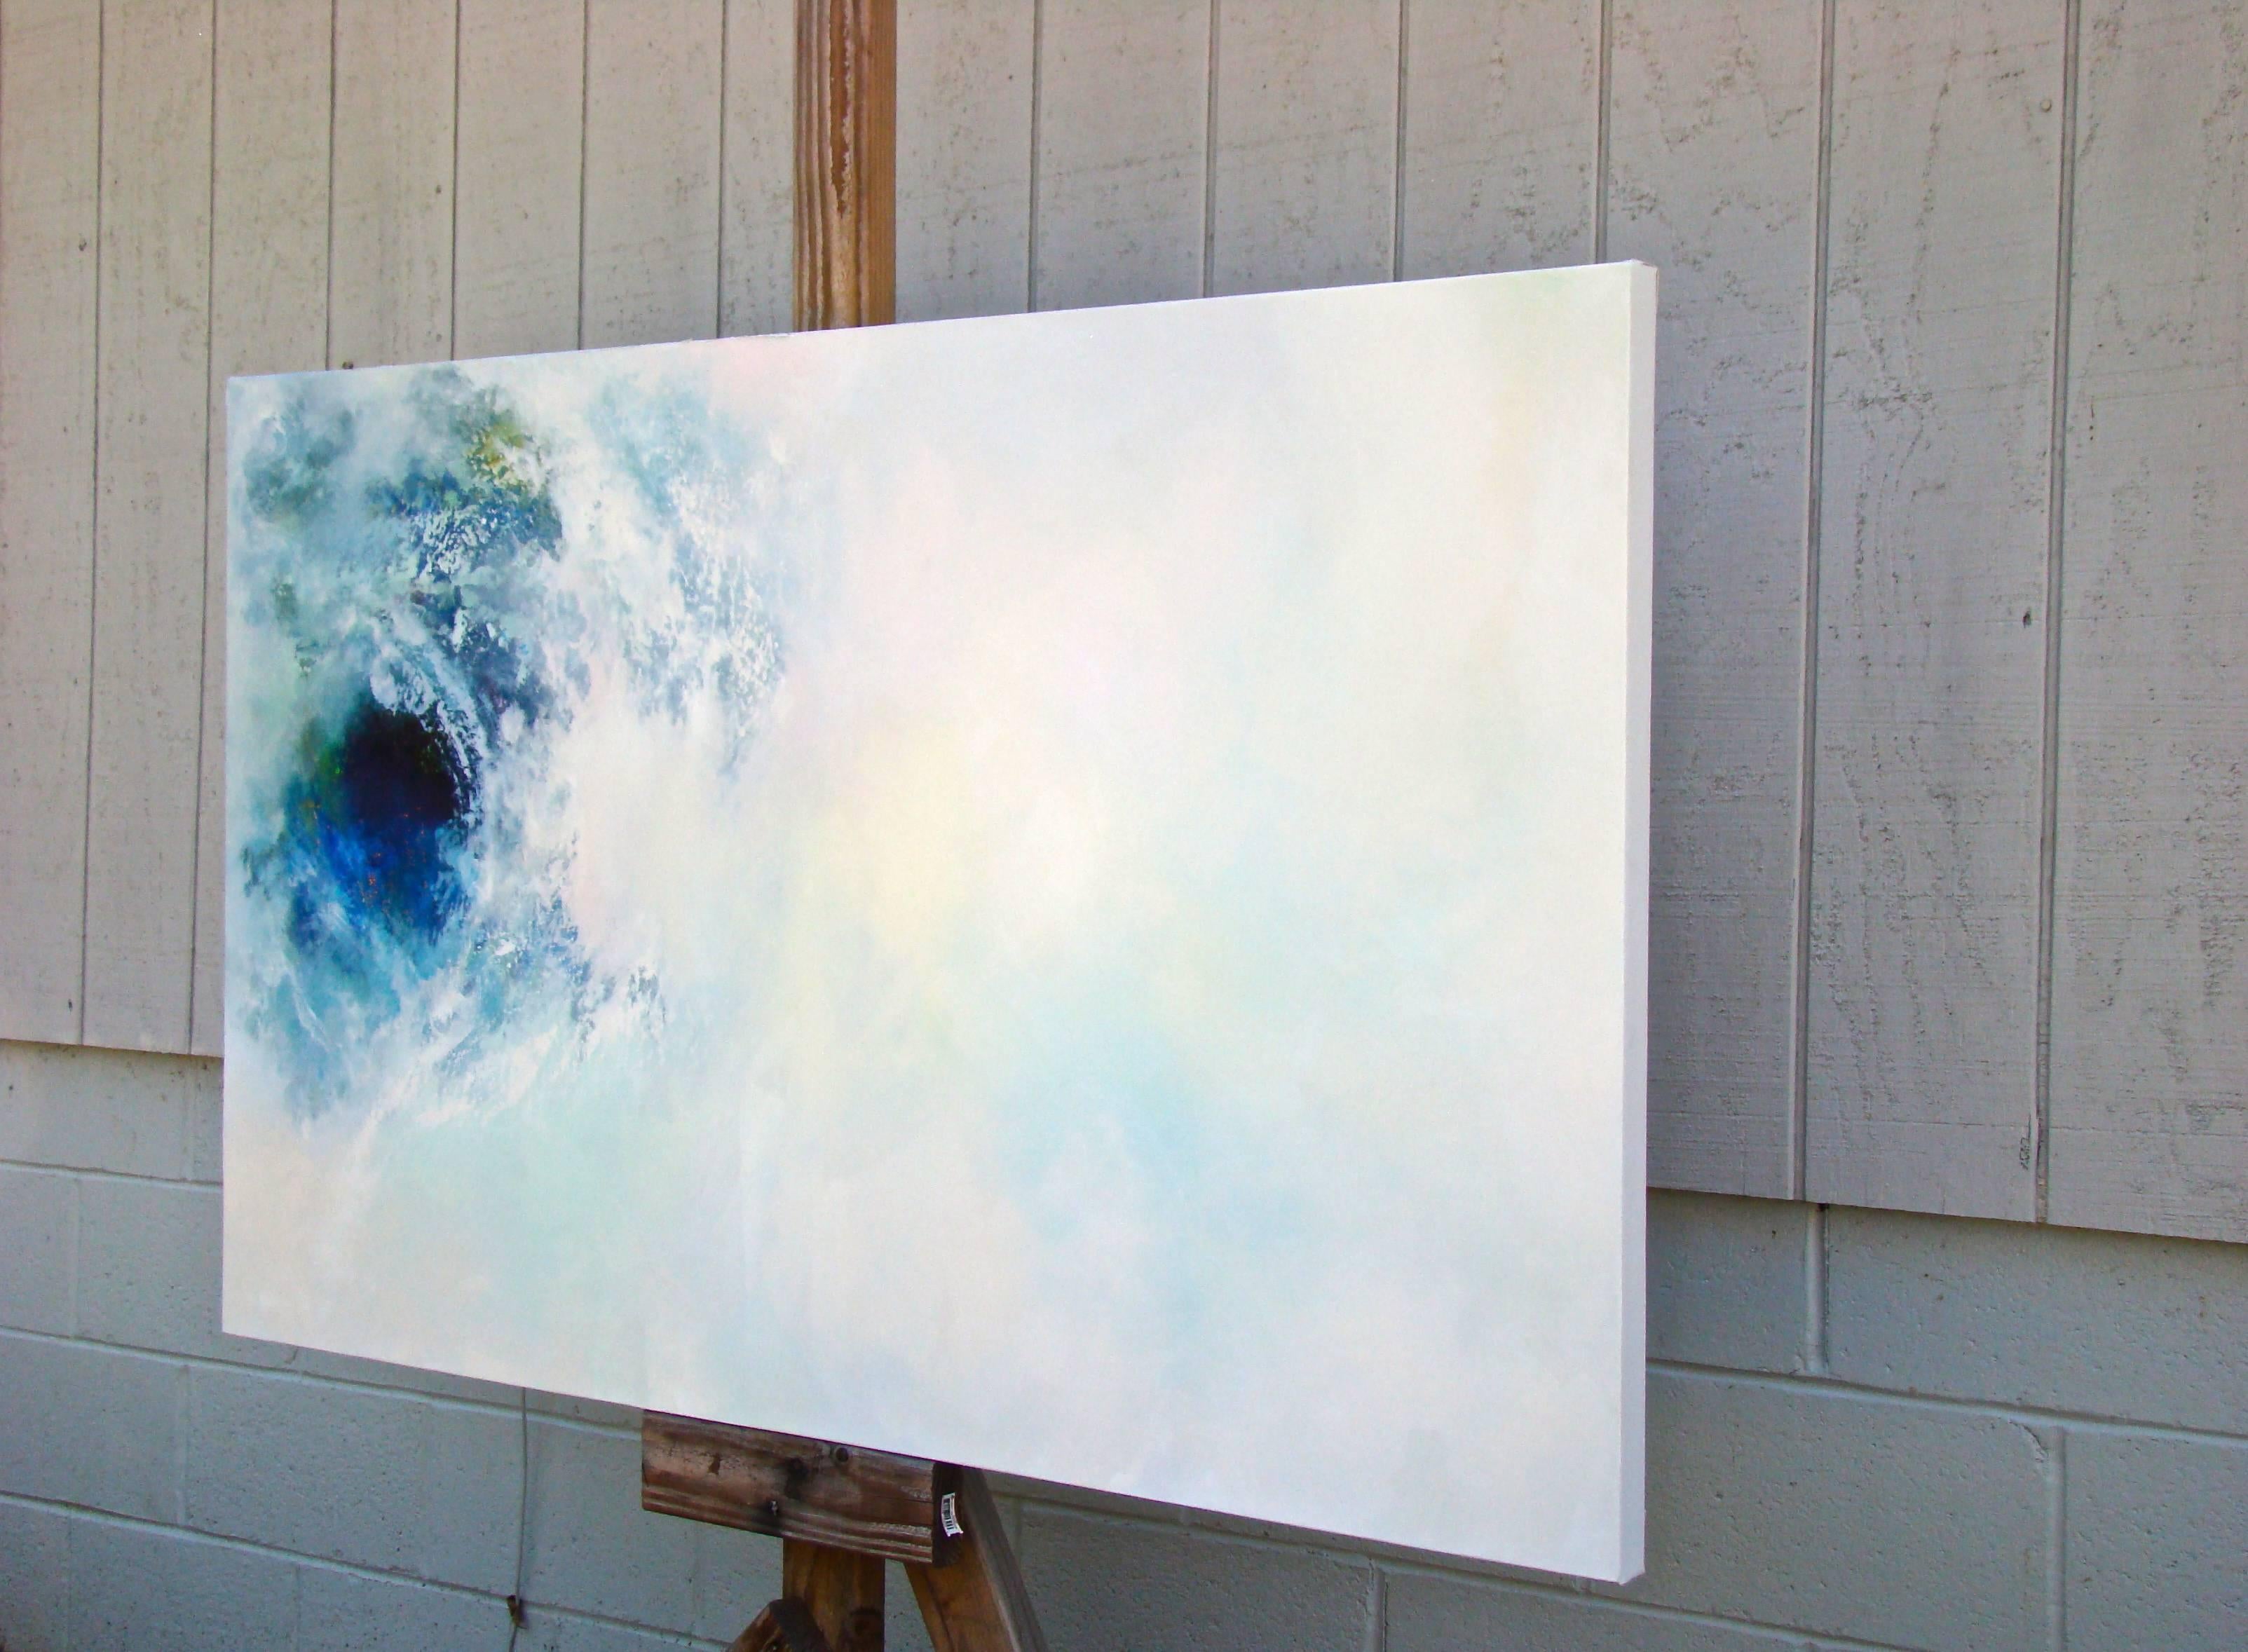 Selah - Vortex - Painting by Wes Sumrall